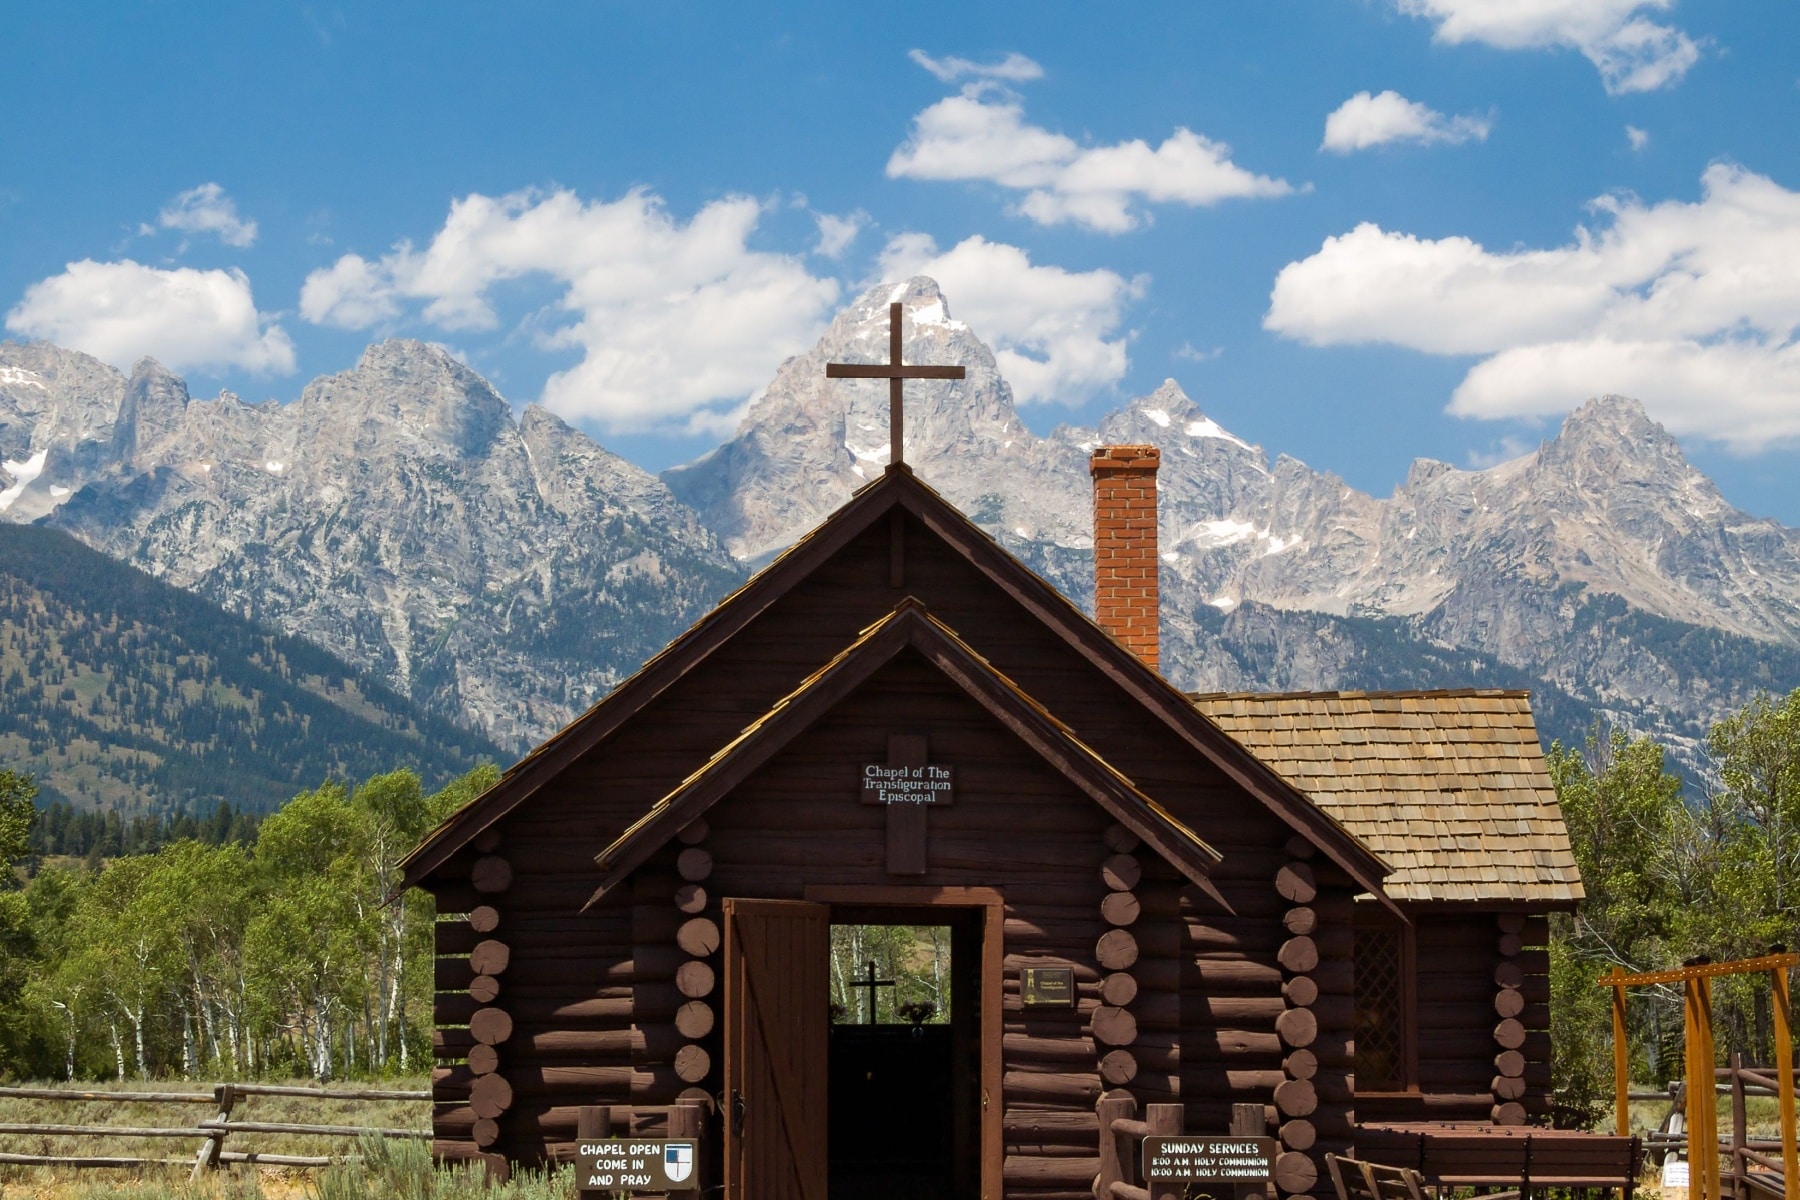 Chapel of the Transfiguration in Grand Teton National Park